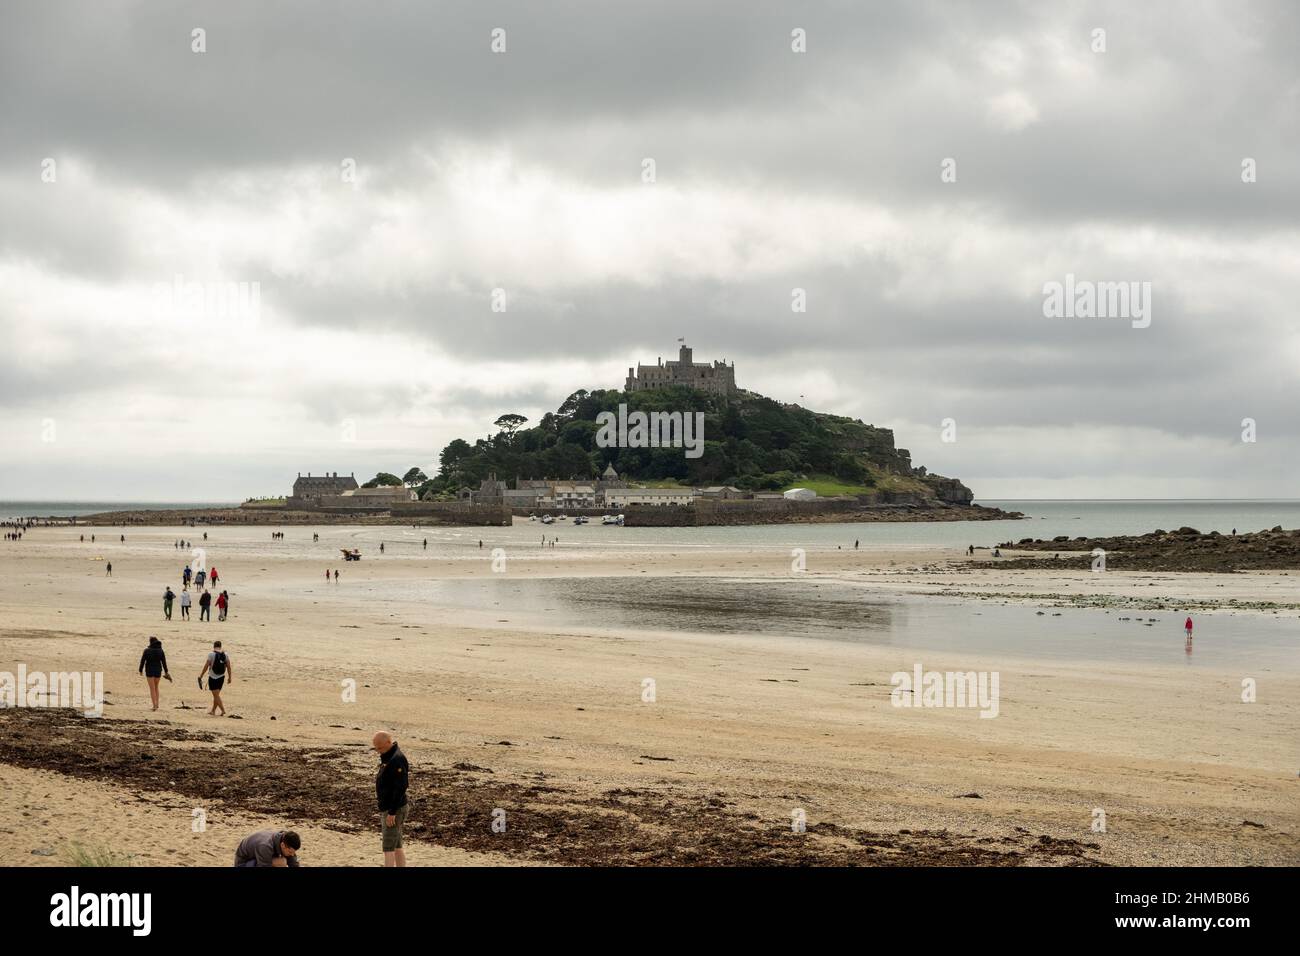 Marazion, UK - 2018: St Michael's Mount is a tidal island linked to the town of Marazion by a man-made causeway passable between mid and low tides Stock Photo